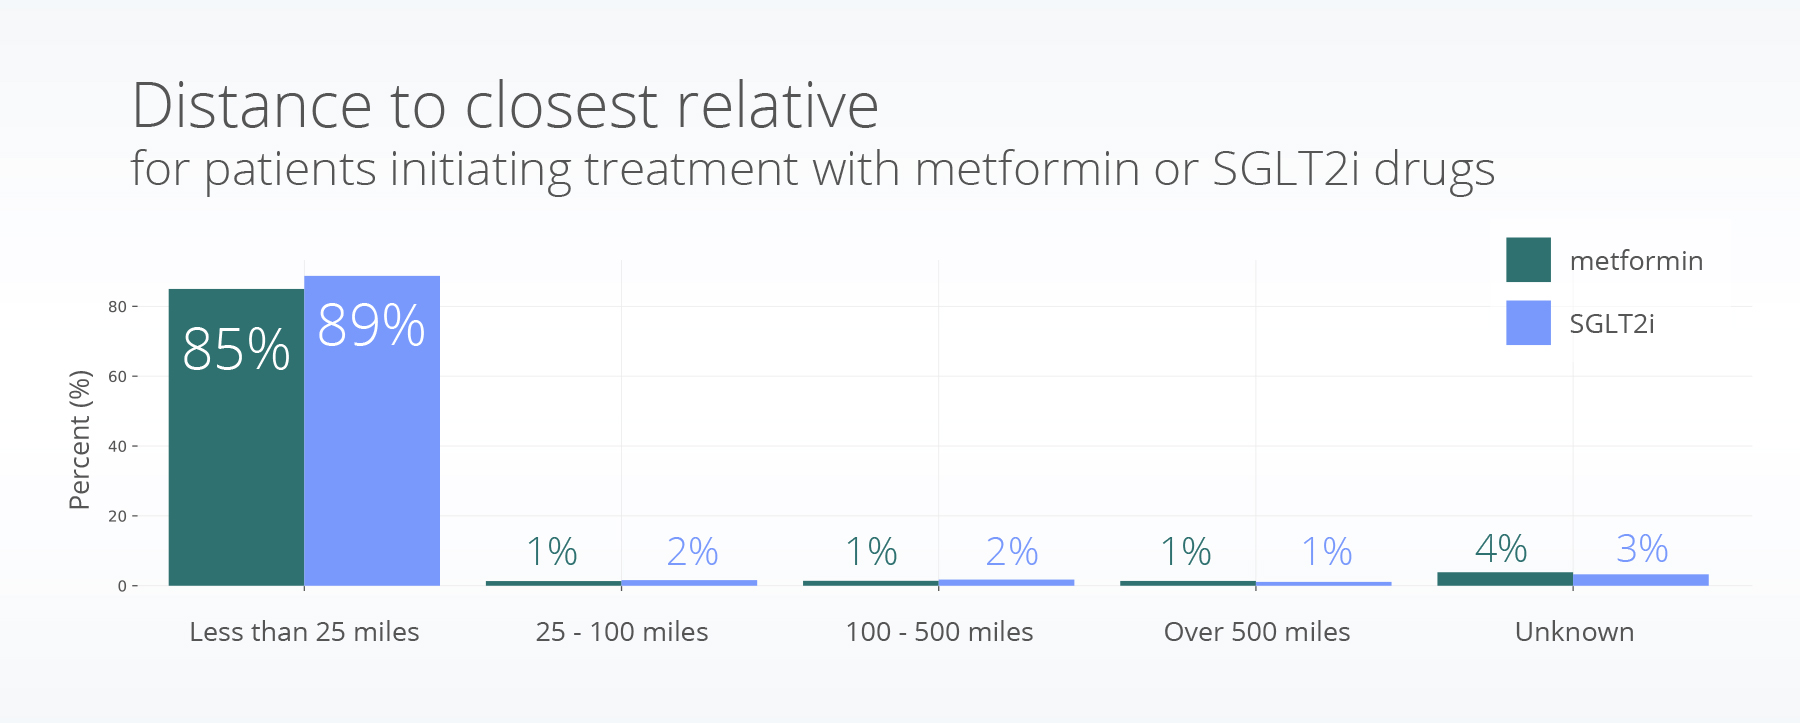 Distance to closest relative for patients initiating treatment with metformin or SGLT2i drugs